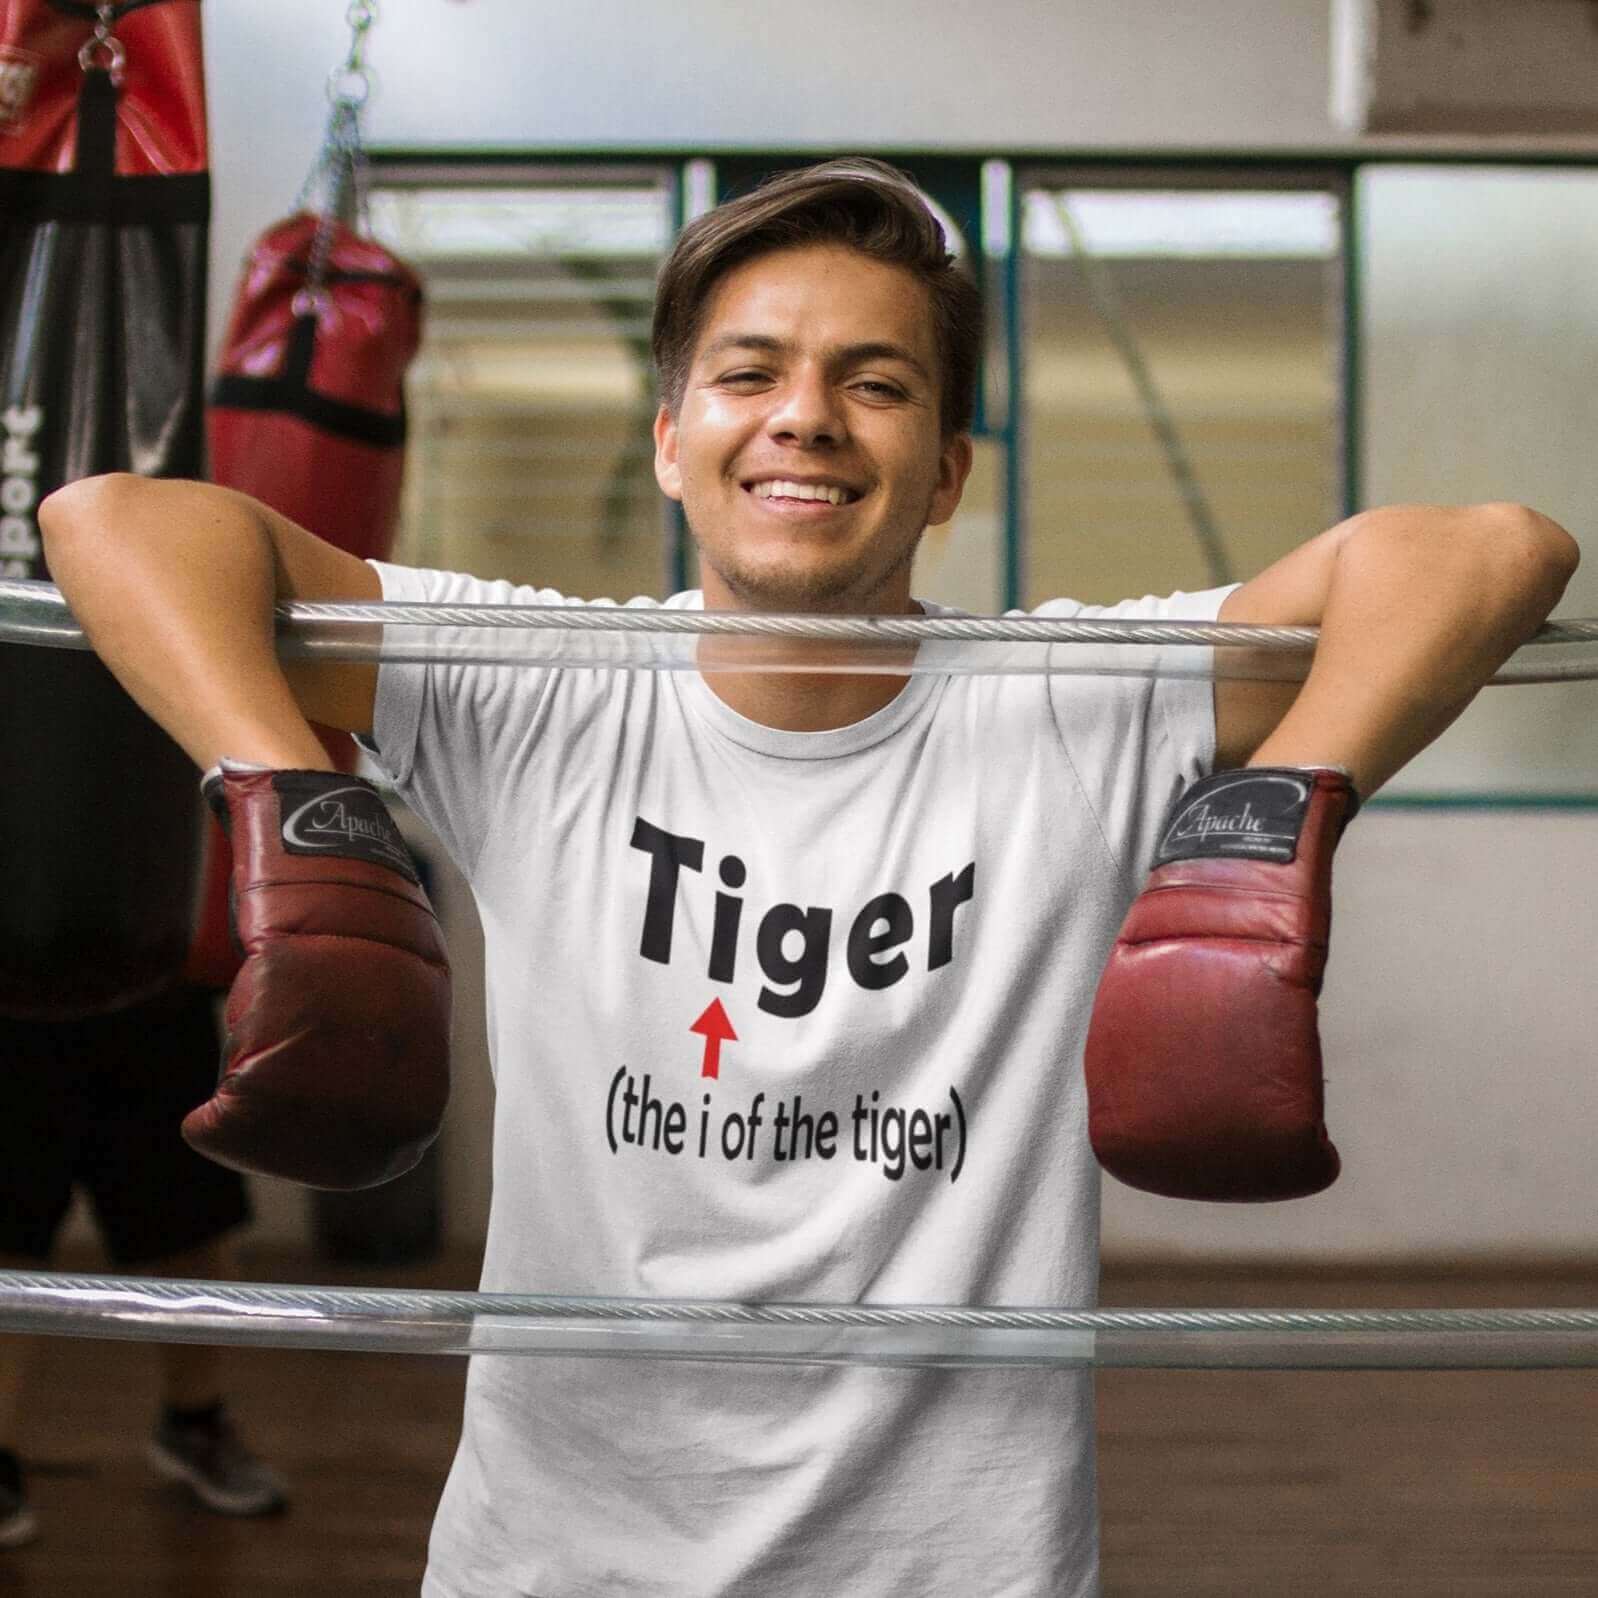 Man in a boxing ring wearing boxing gloves and a white t-shirt. The t-shirt has the word Tiger and in smaller letters it says the I of the tiger with an arrow pointing to the letting I in the words tiger. The graphics are printed on the front of the shirt